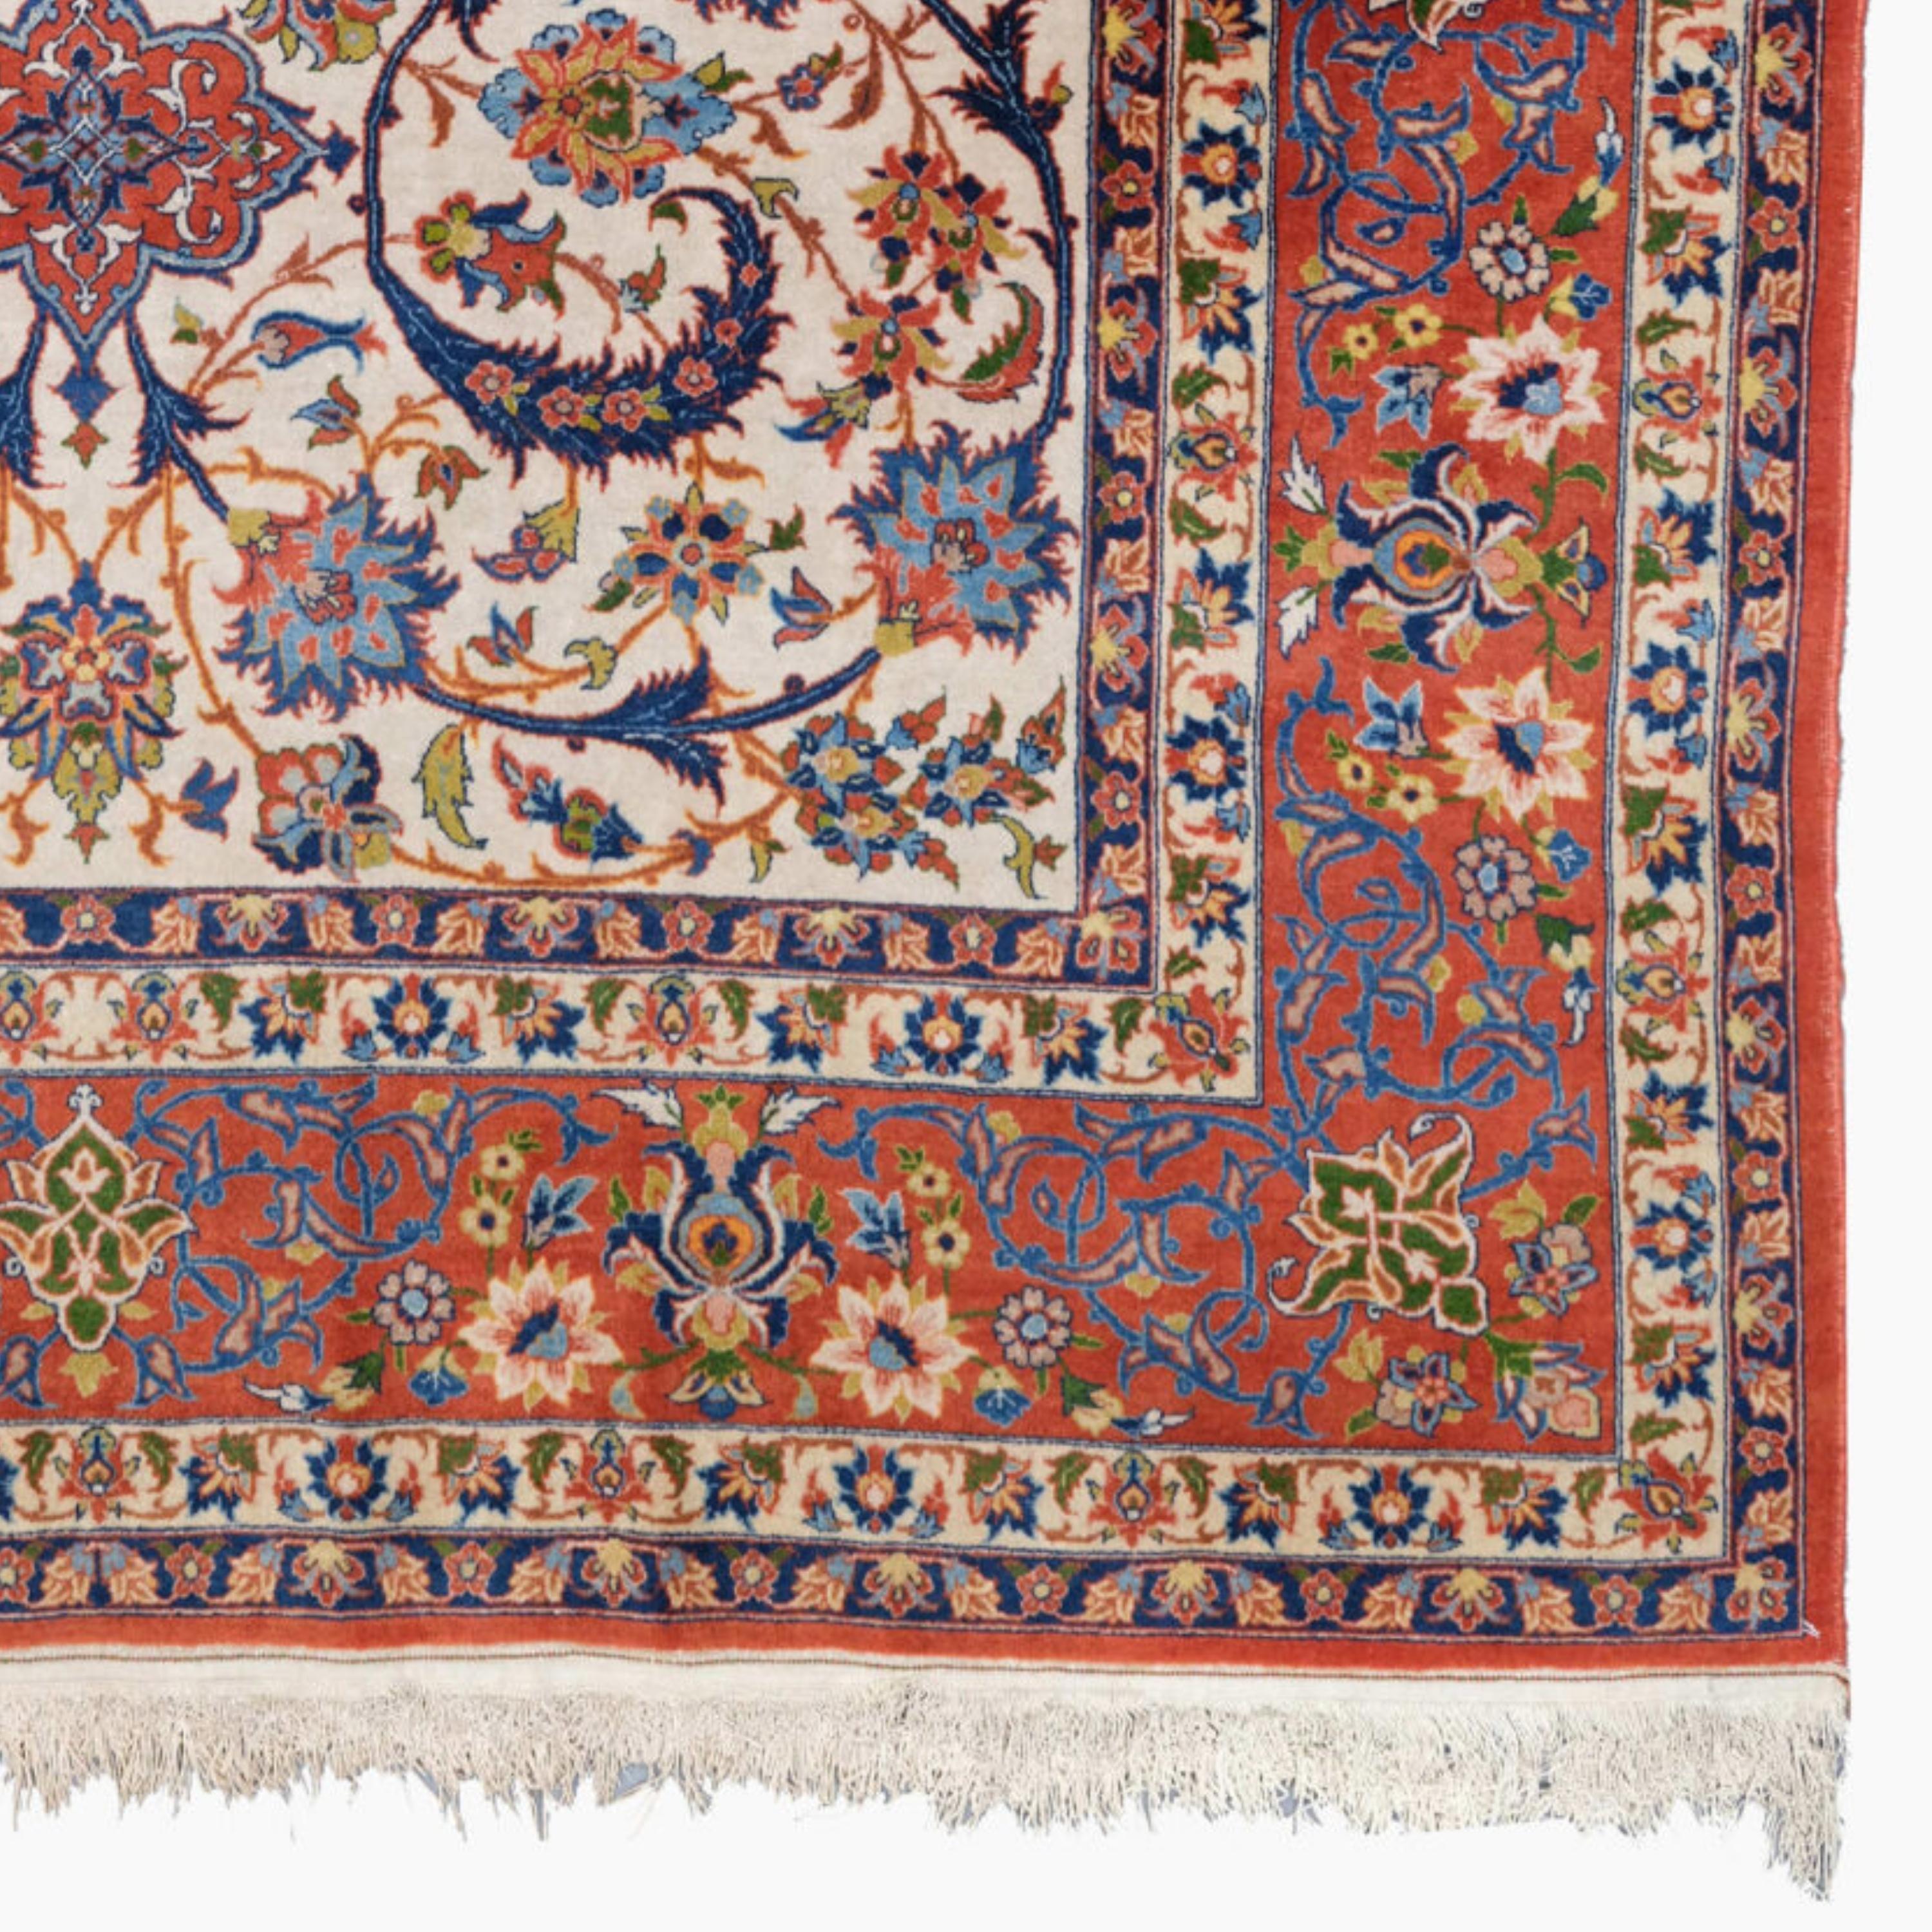 19th Century Antique Isfahan Rug - Late of 19th Centıry Isfahan Rug For Sale